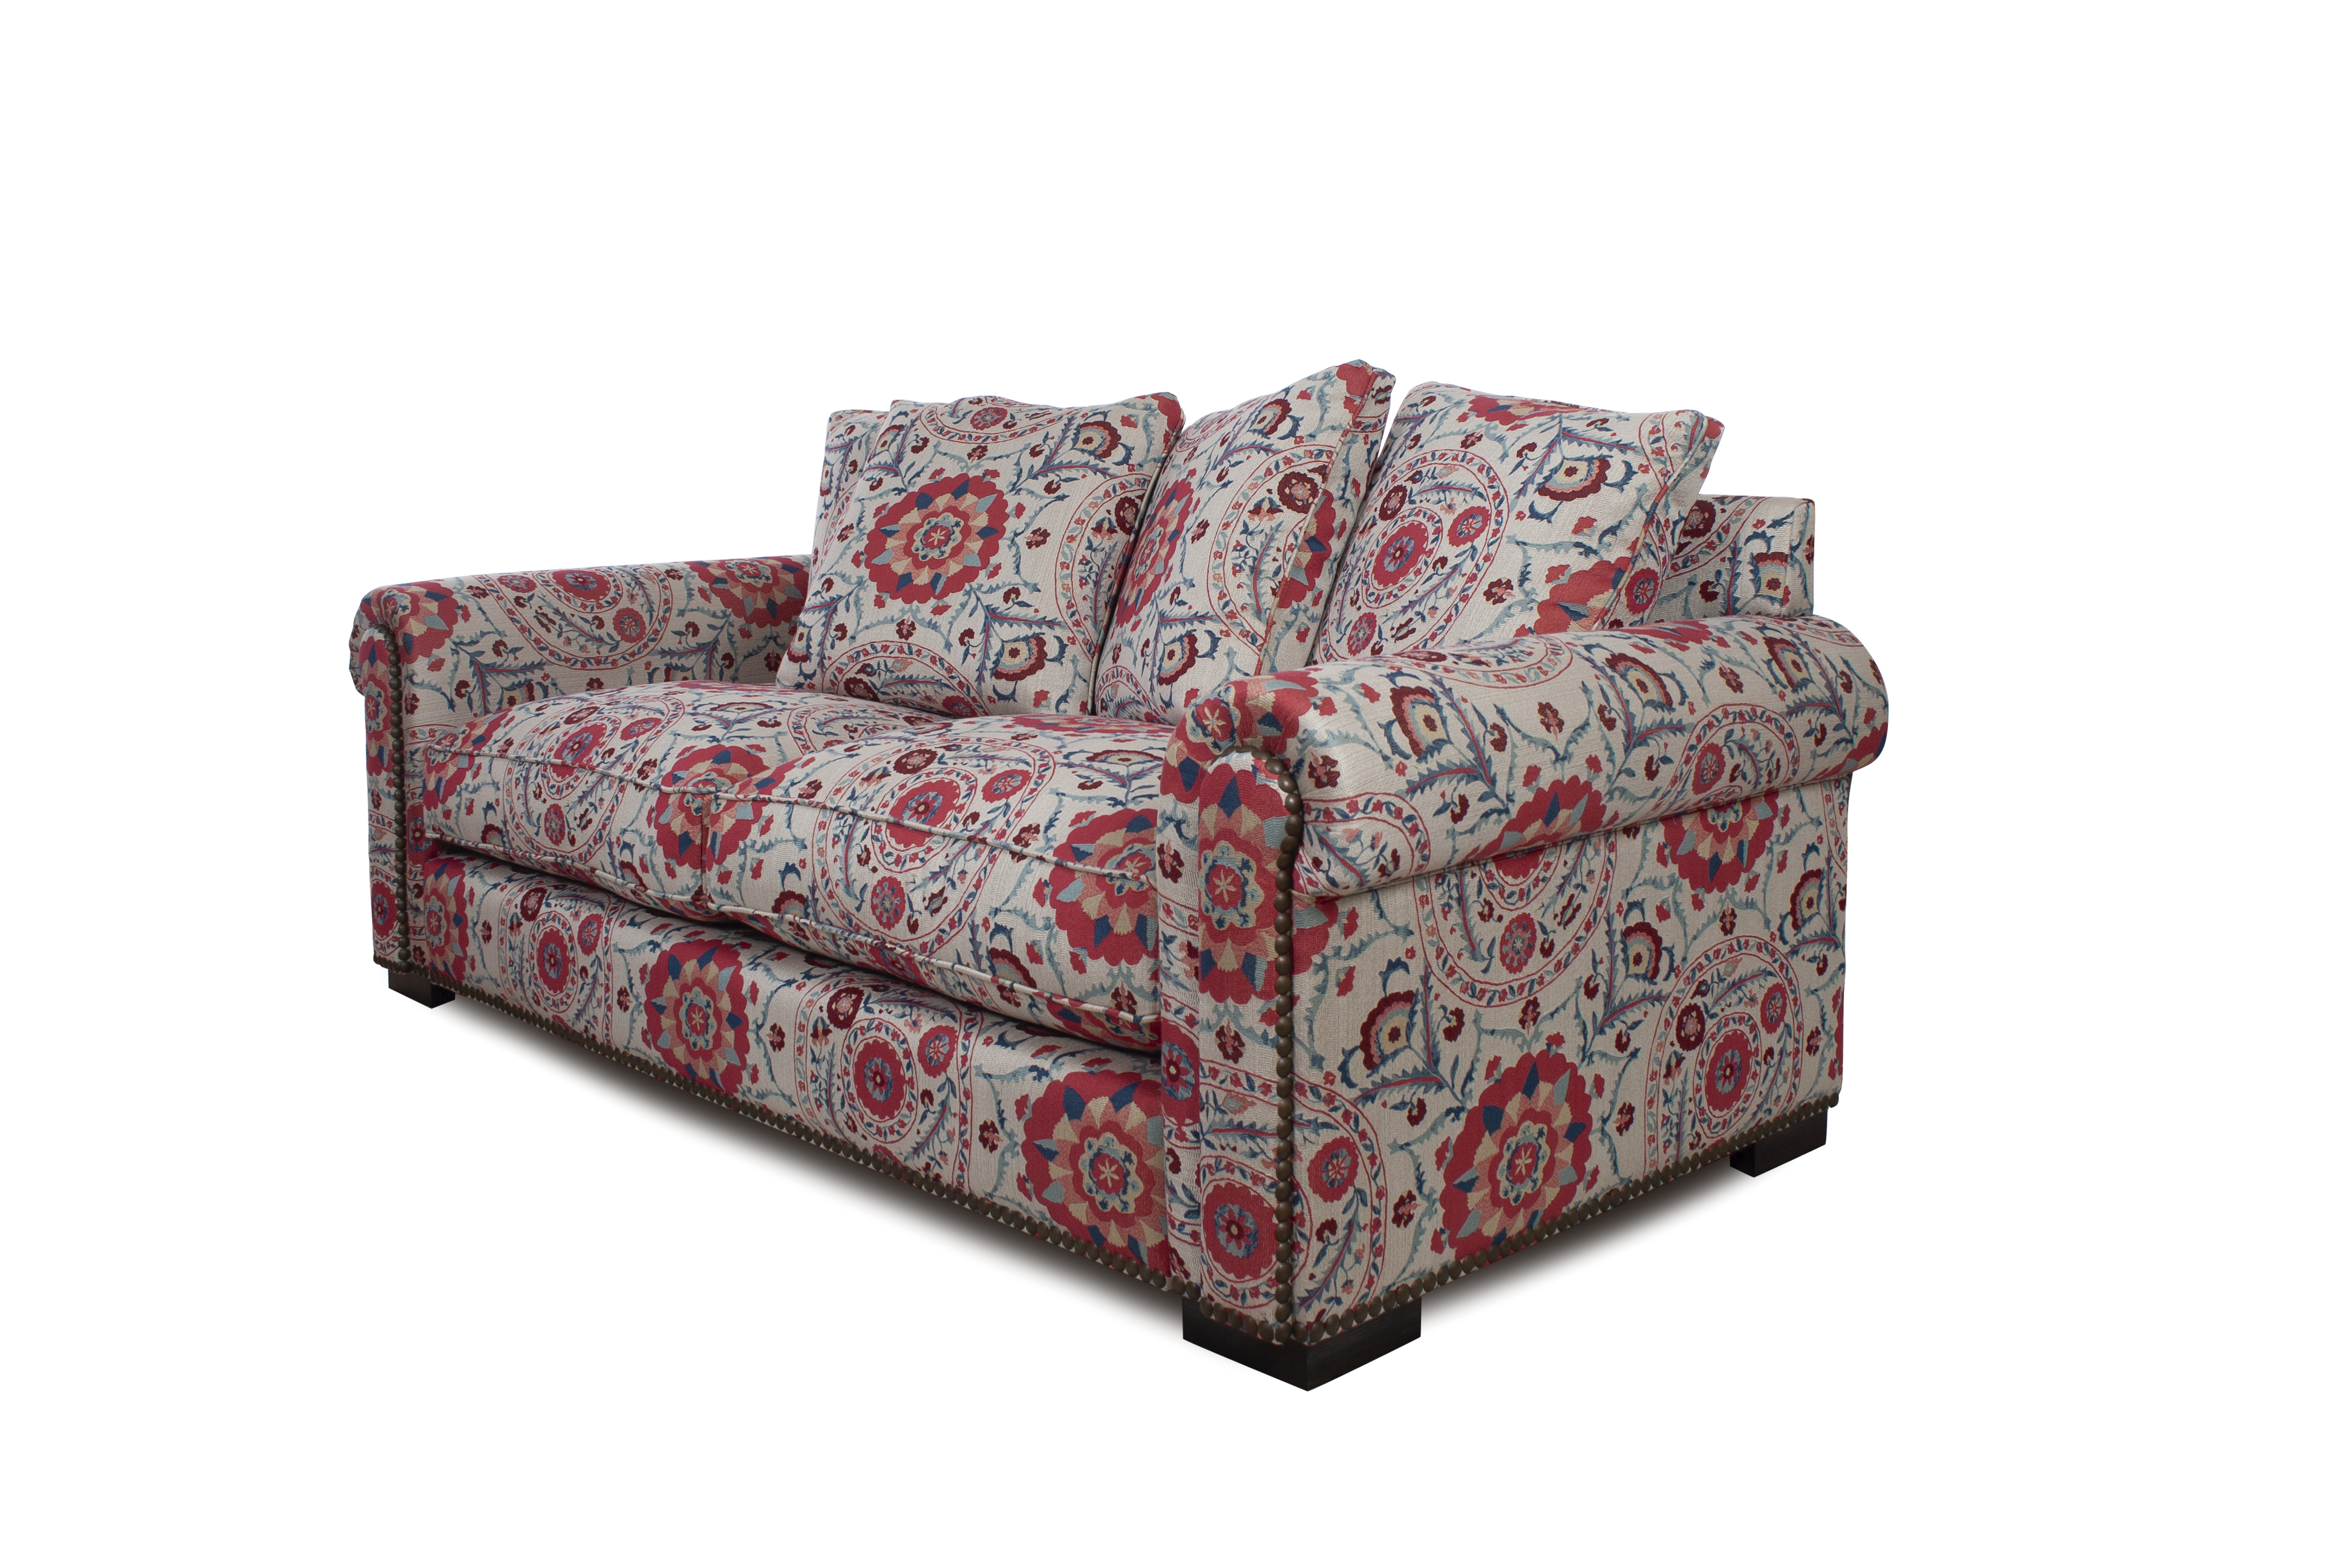 Crearte Collections Lord sofa 2